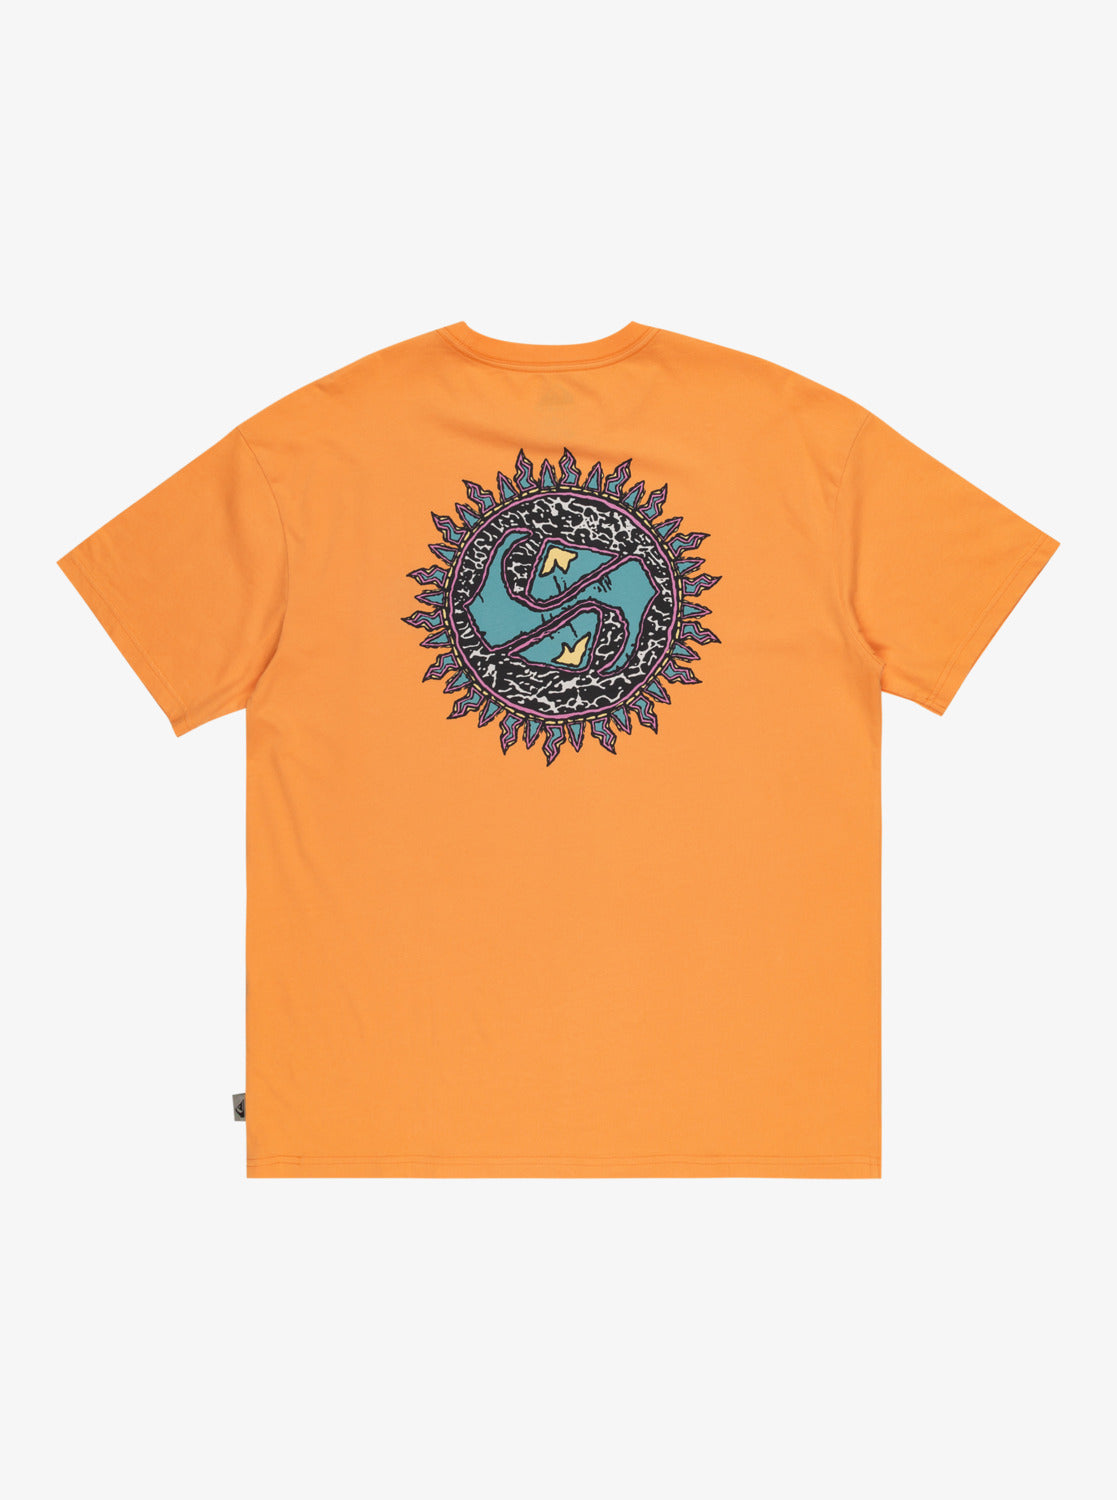 Quicksilver Spin Cycle Oversize Tee - Tangerine